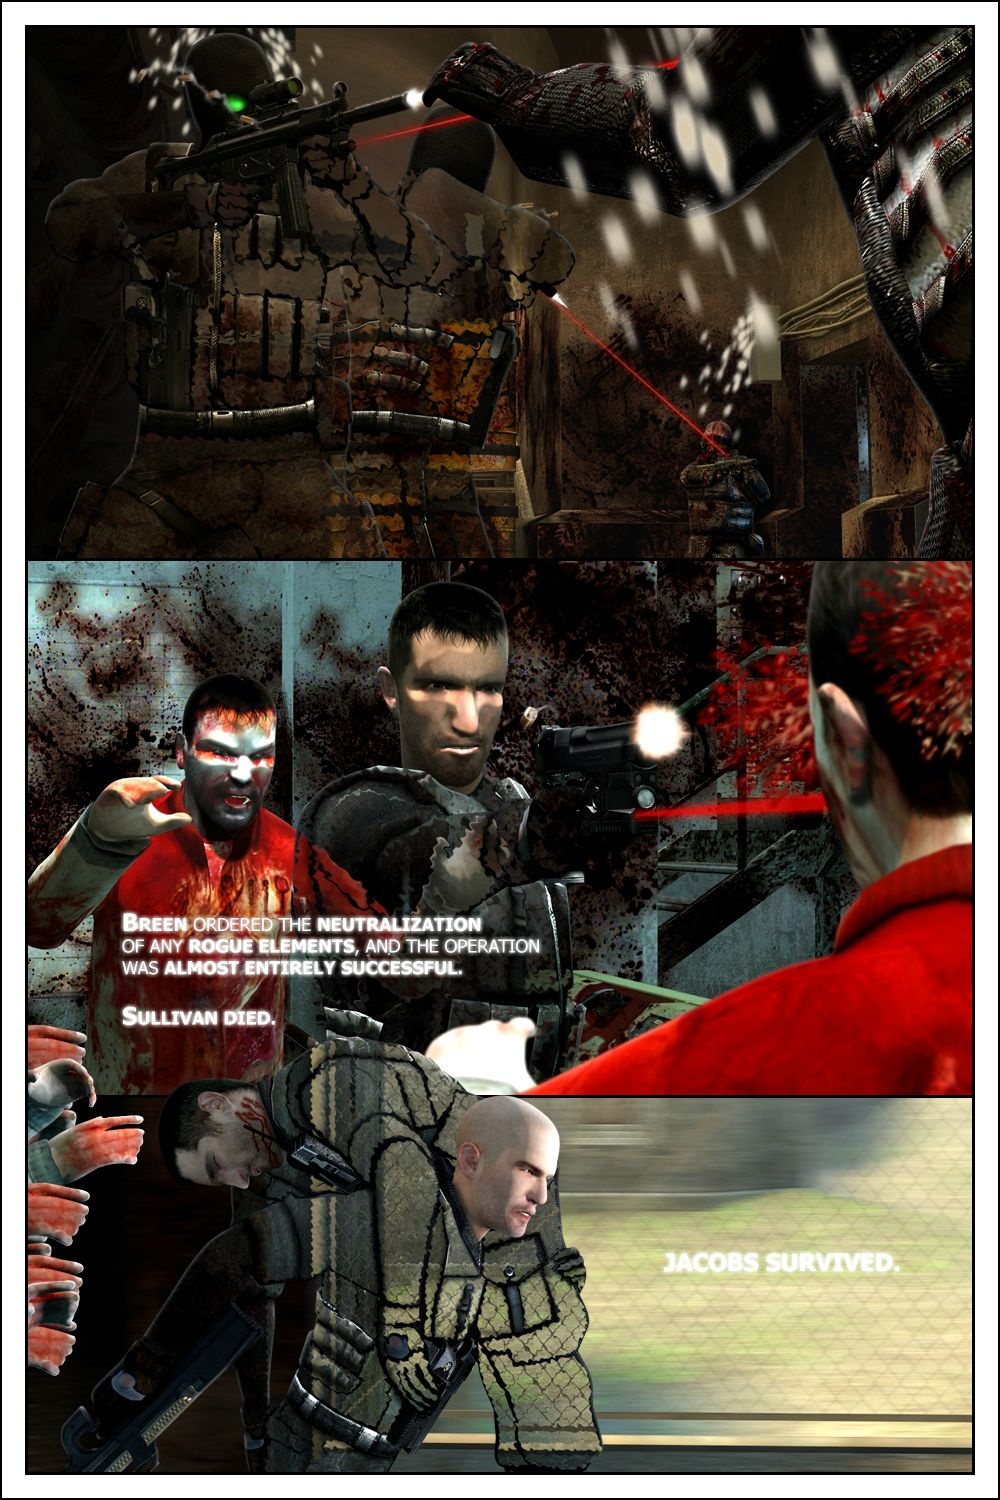 In a flashback, the two Civil Protection superior officers fight for their lives, ultimately leading to one, Captain Sullivan, carrying the other as he runs from the infected. The narration says: Breen ordered the neutralization of any rogue elements, and the operation was almost entirely successful. Sullivan died, Jacobs survived.